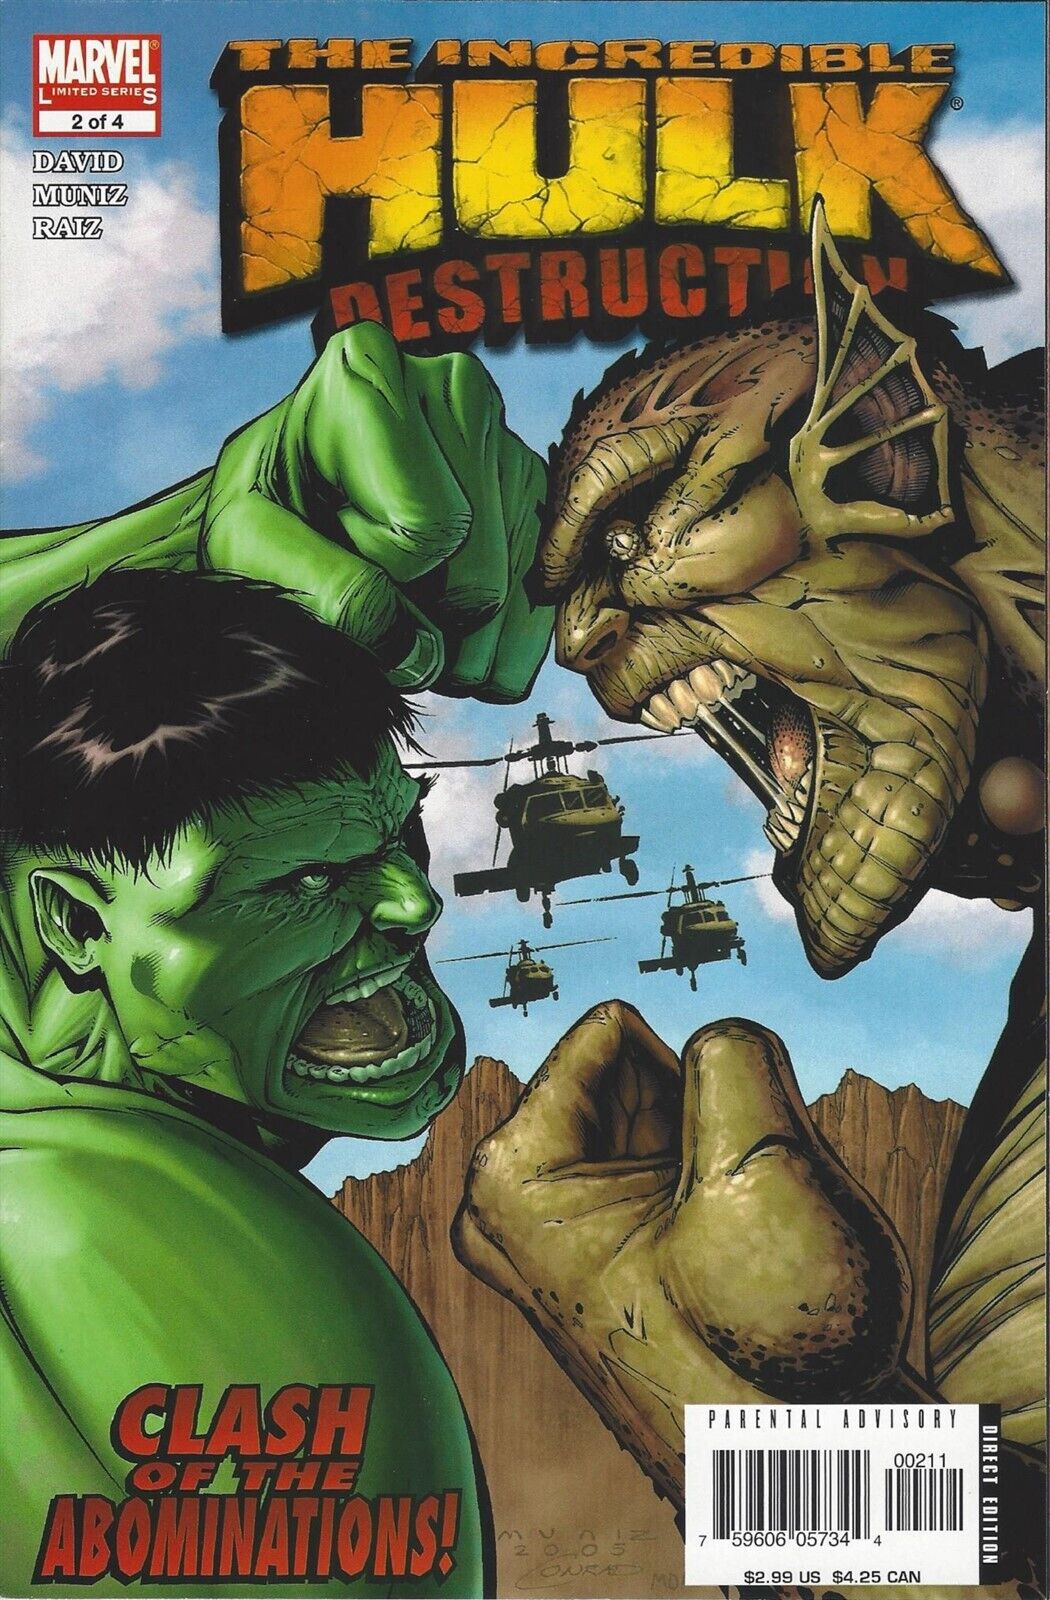 Hulk: Destruction #2 Clash of the Abominations Part 2 of 4